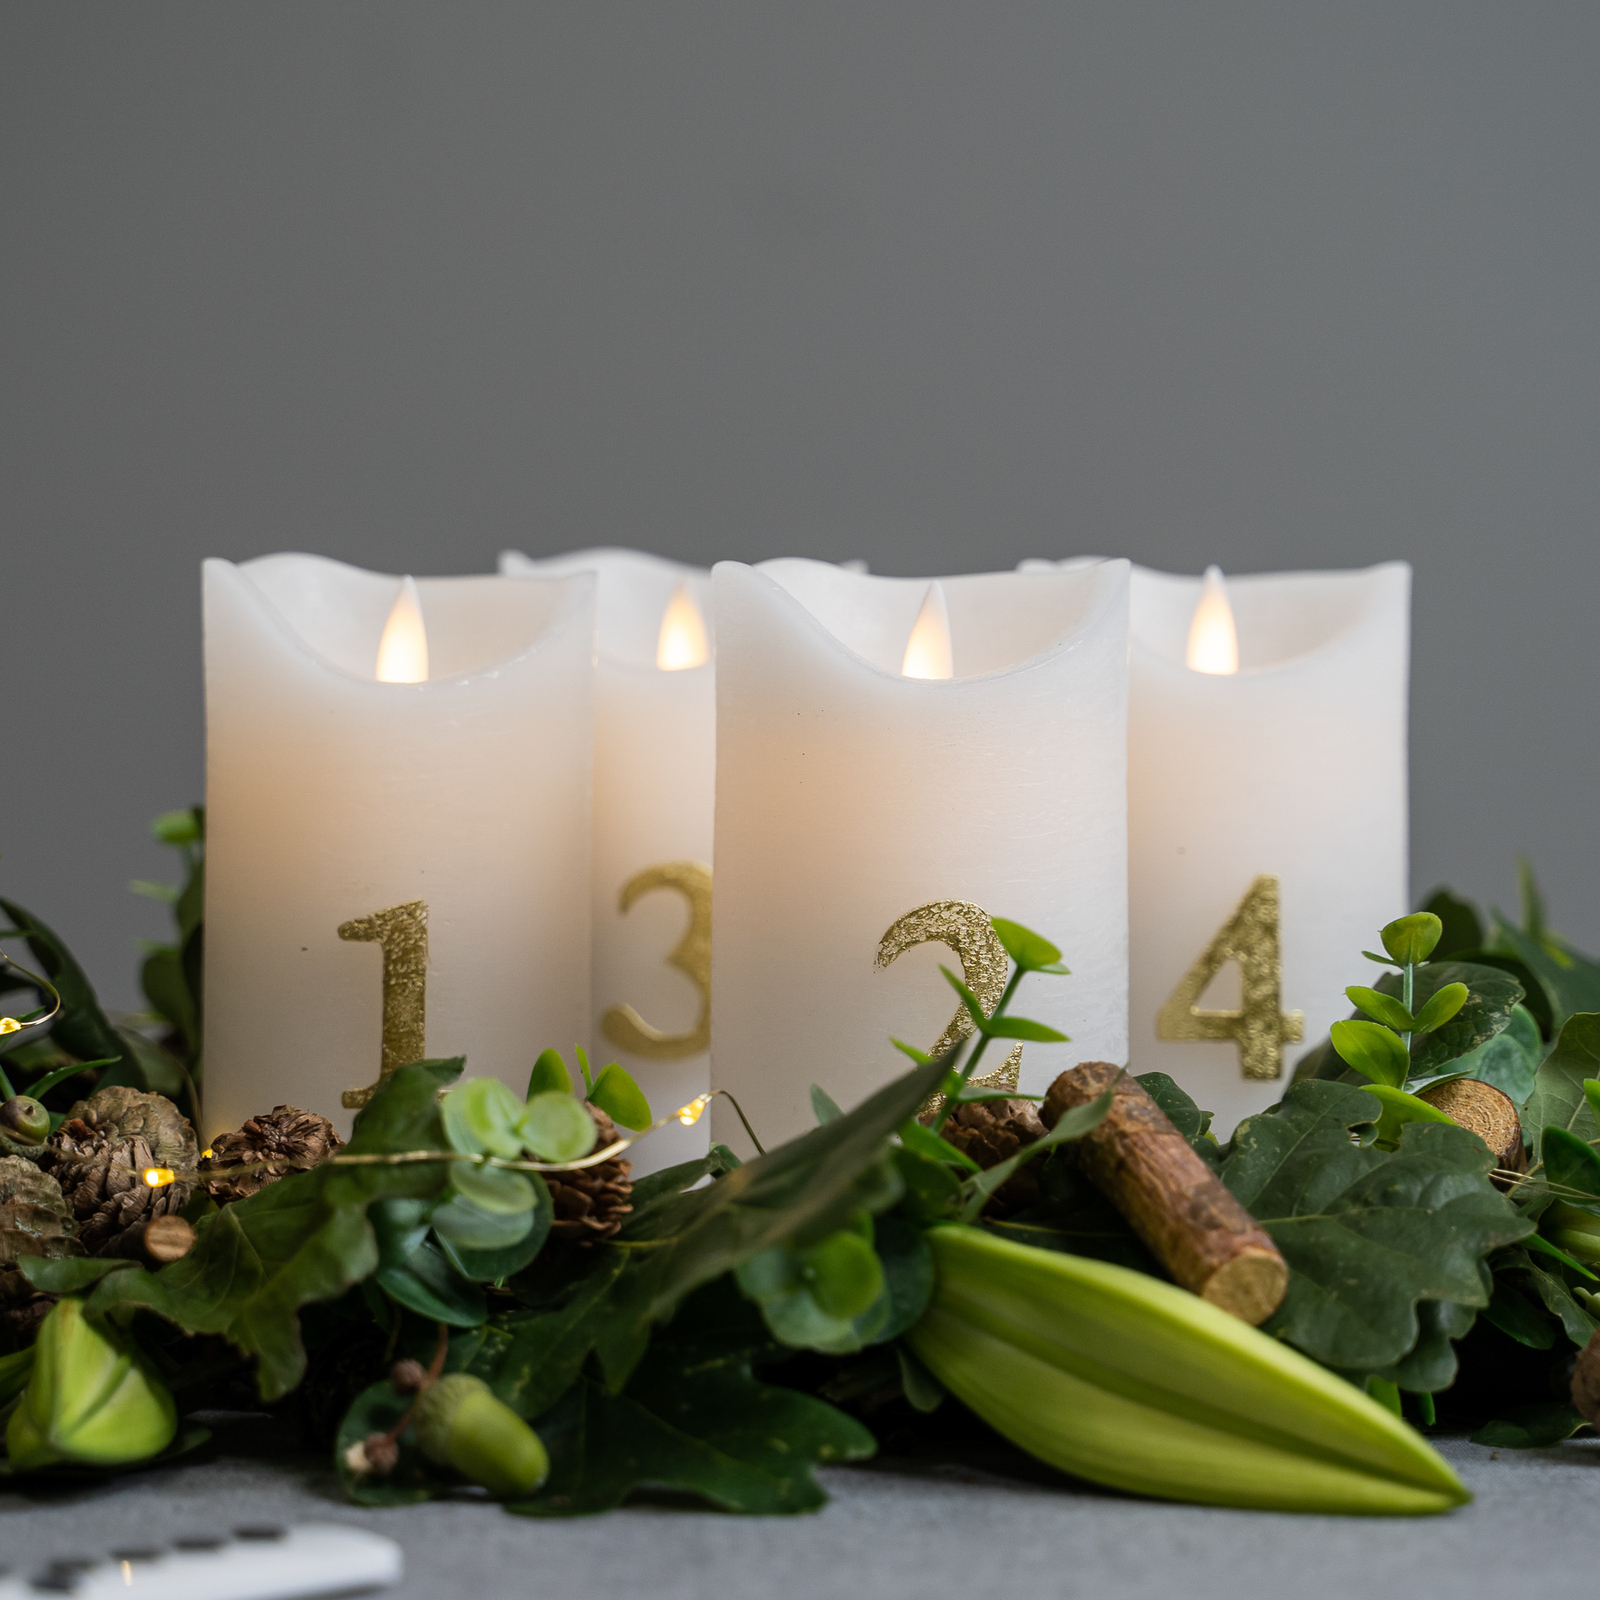 LED candle Sara Advent 4pcs height 12.5cm white/gold